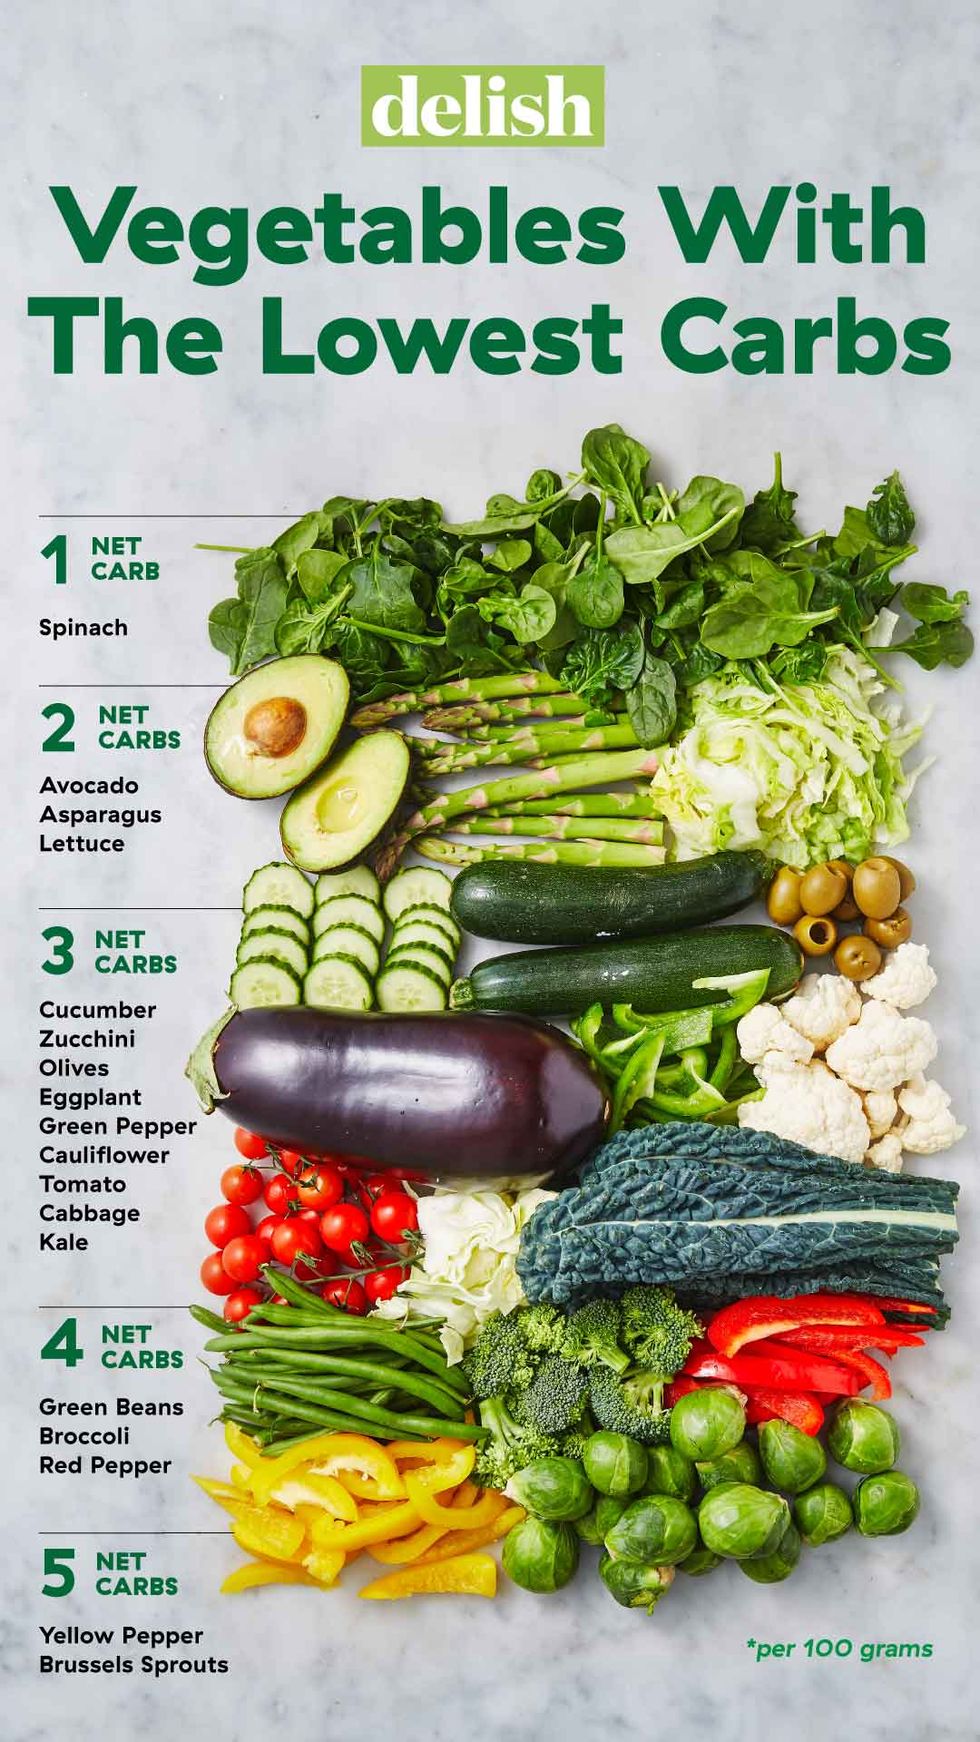 lowest-carb-vegetables-visual-guide-chart-of-lowest-carb-veggies